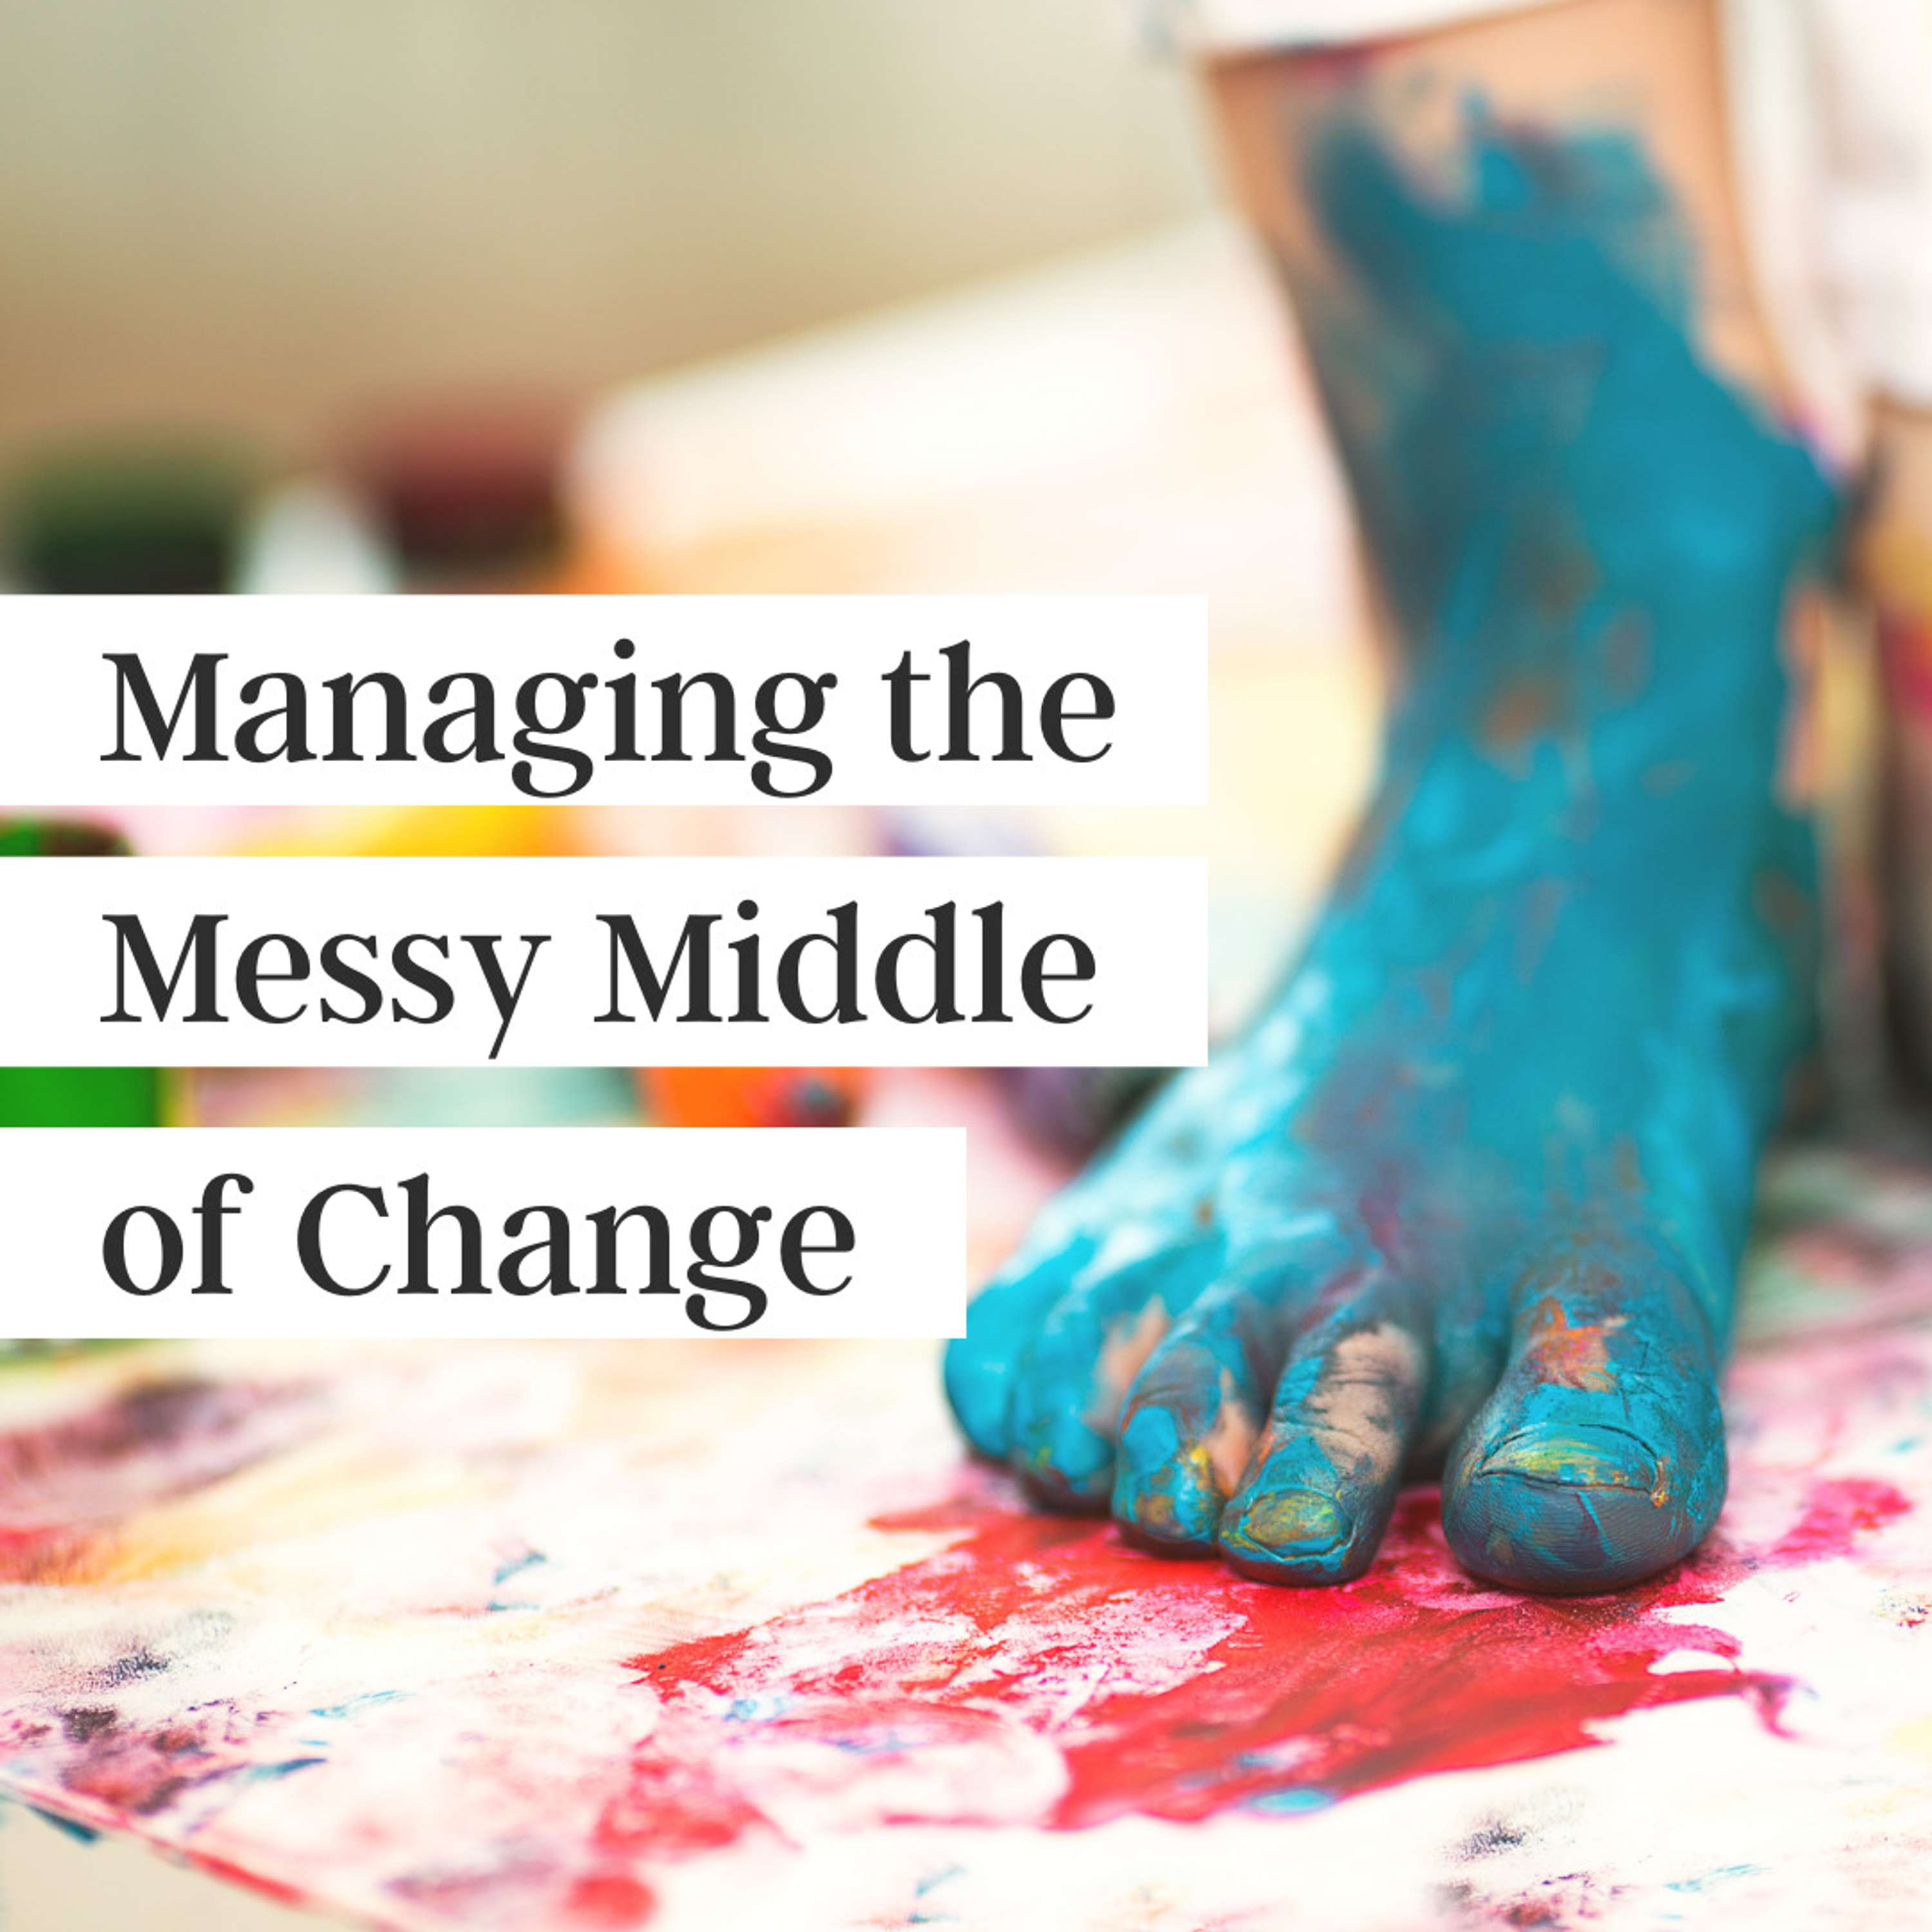 Managing the Messy Middle